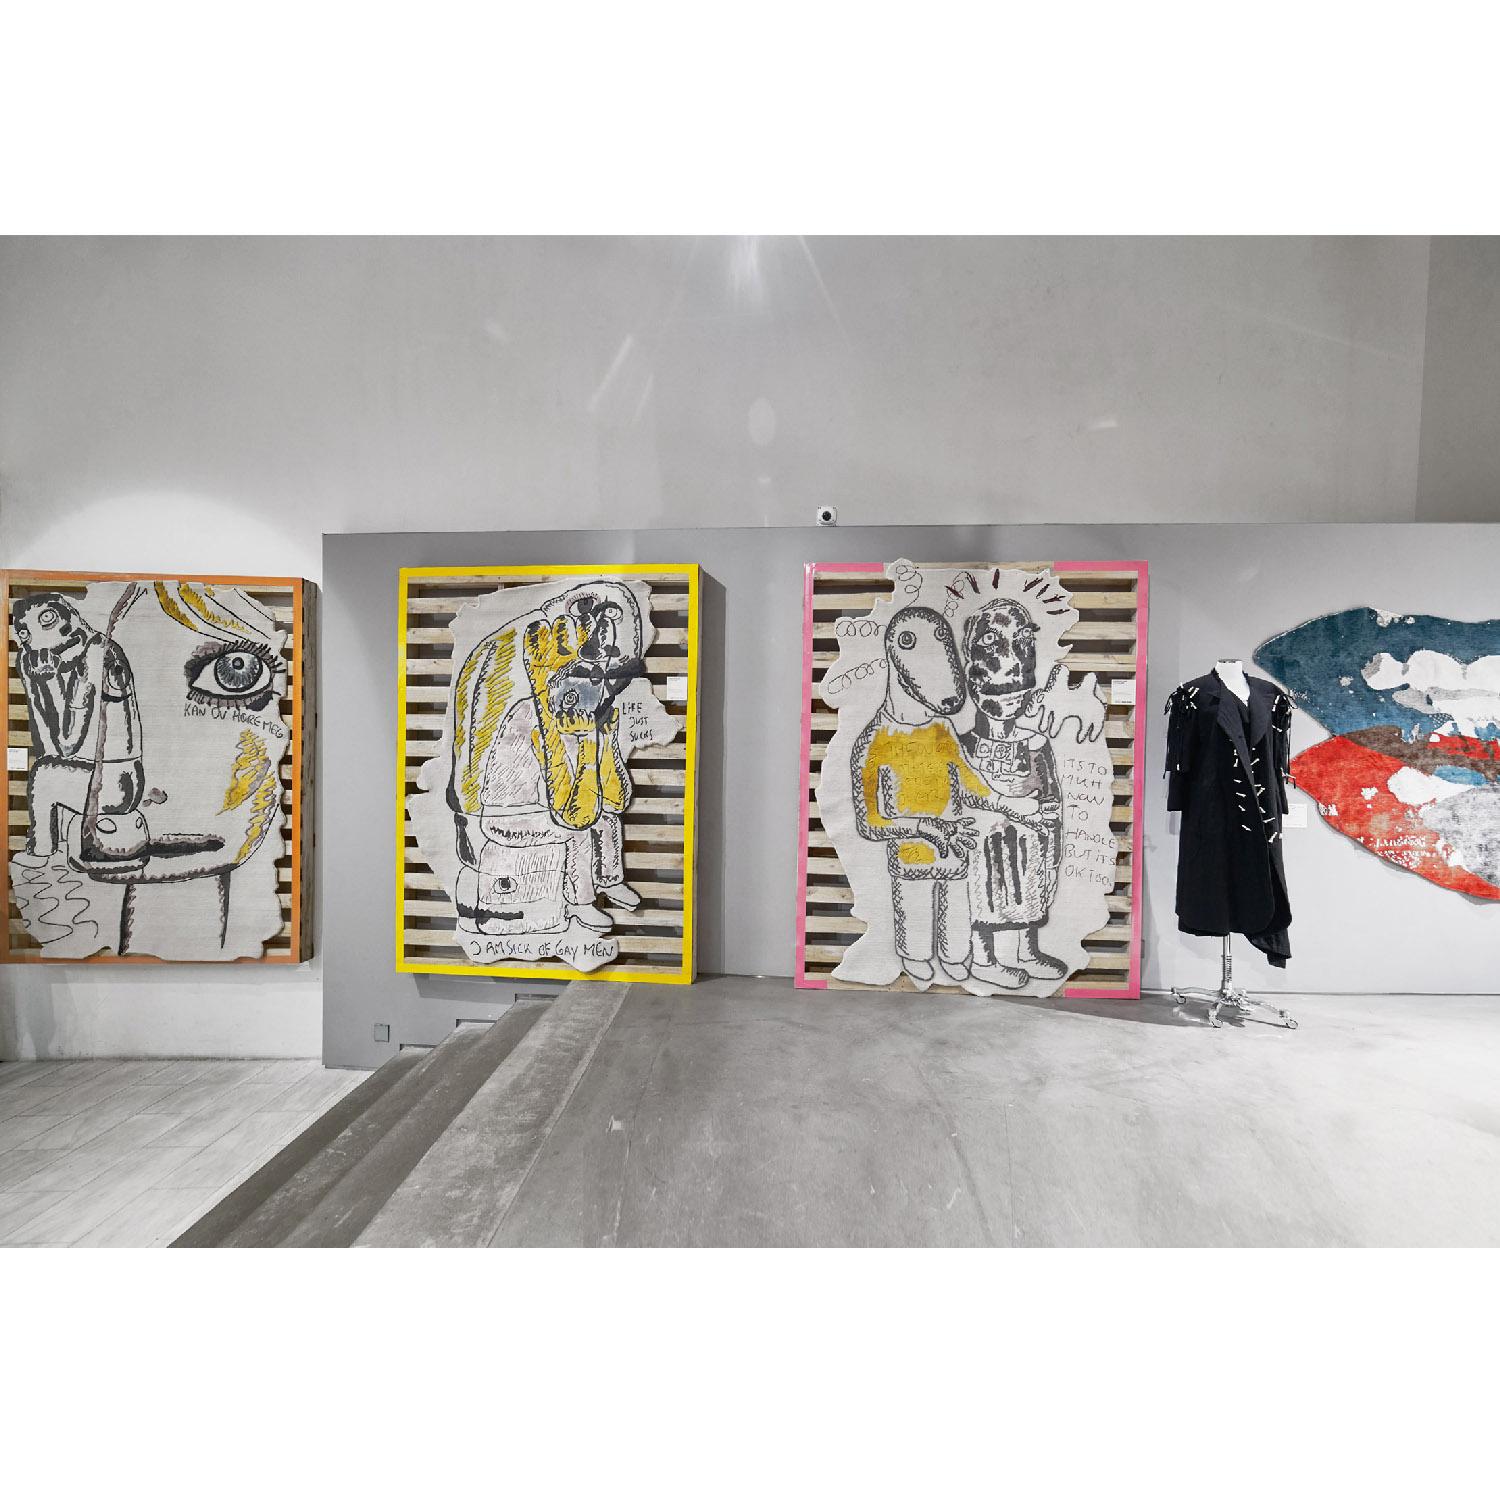 Limited edition carpet by Henzel Studio with X Bjarne Melgaard in wool and silk.

Henzel Studio collaboration with X Bjarne Melgaard. 

As a part of Henzel Studio's ongoing program of collaborations with contemporary artists and artist estates,